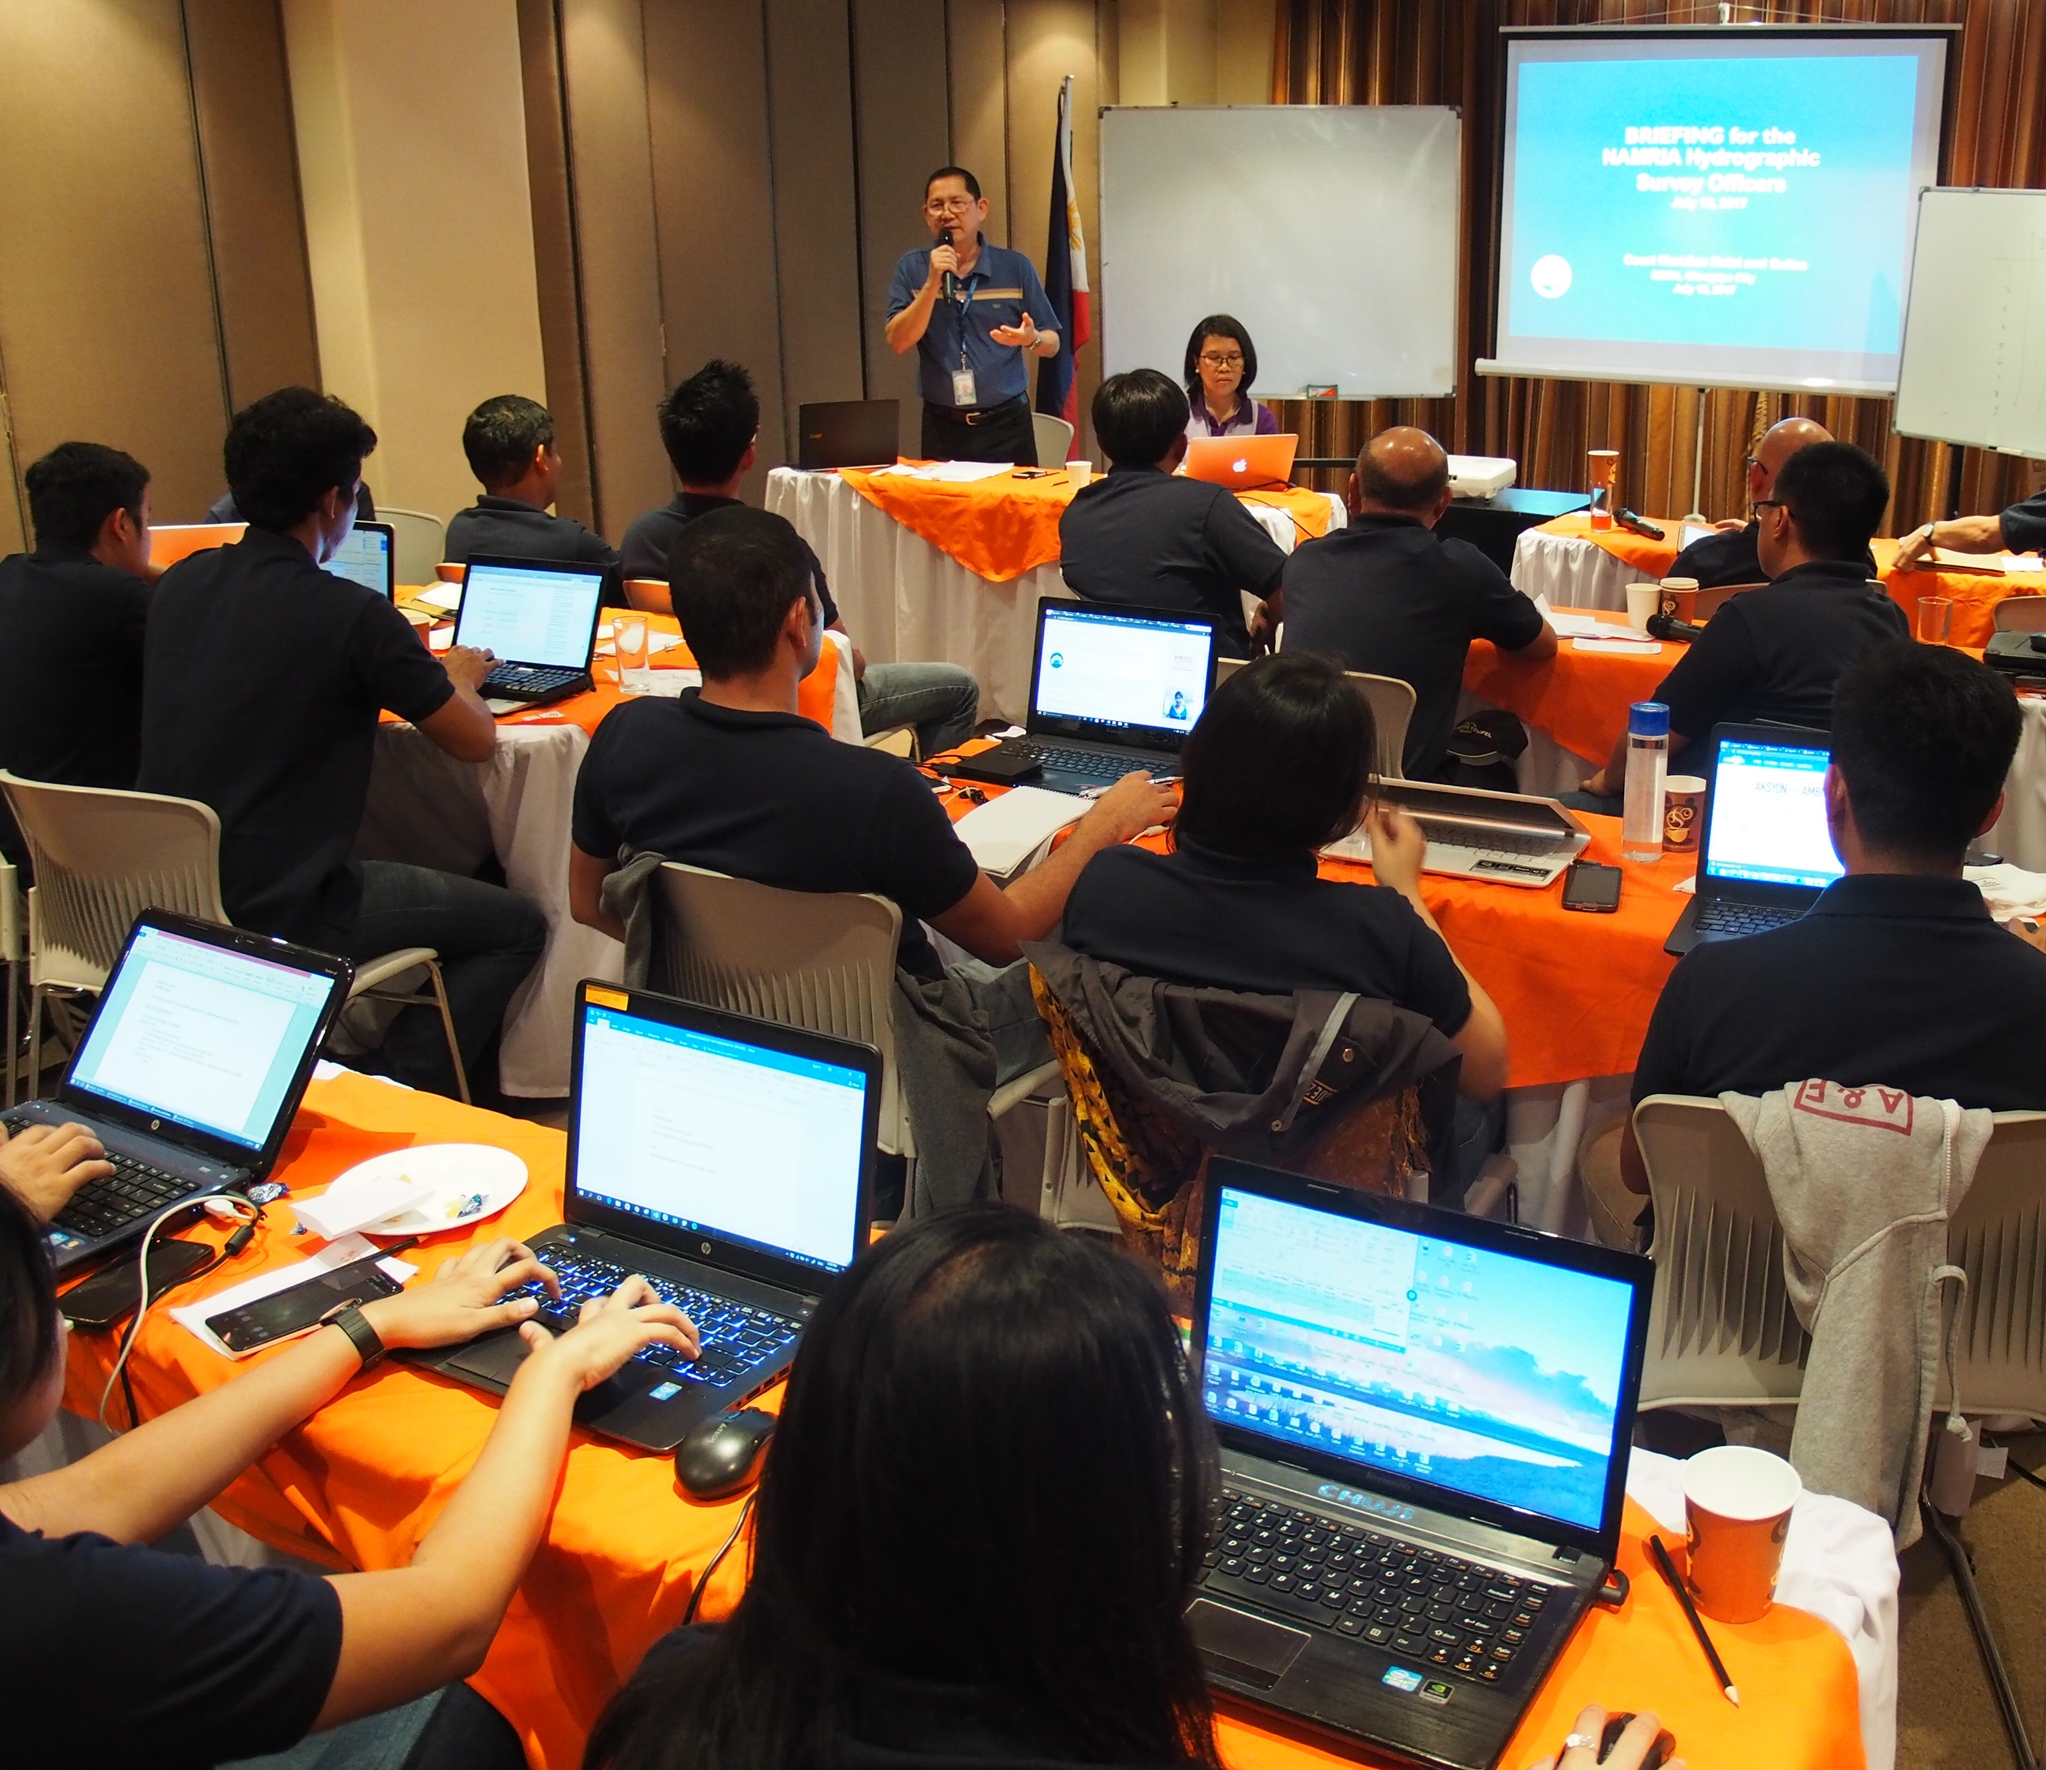 DA Cabanayan discusses about the and programs of NAMRIA during the seminar workshop for hydrographic officers